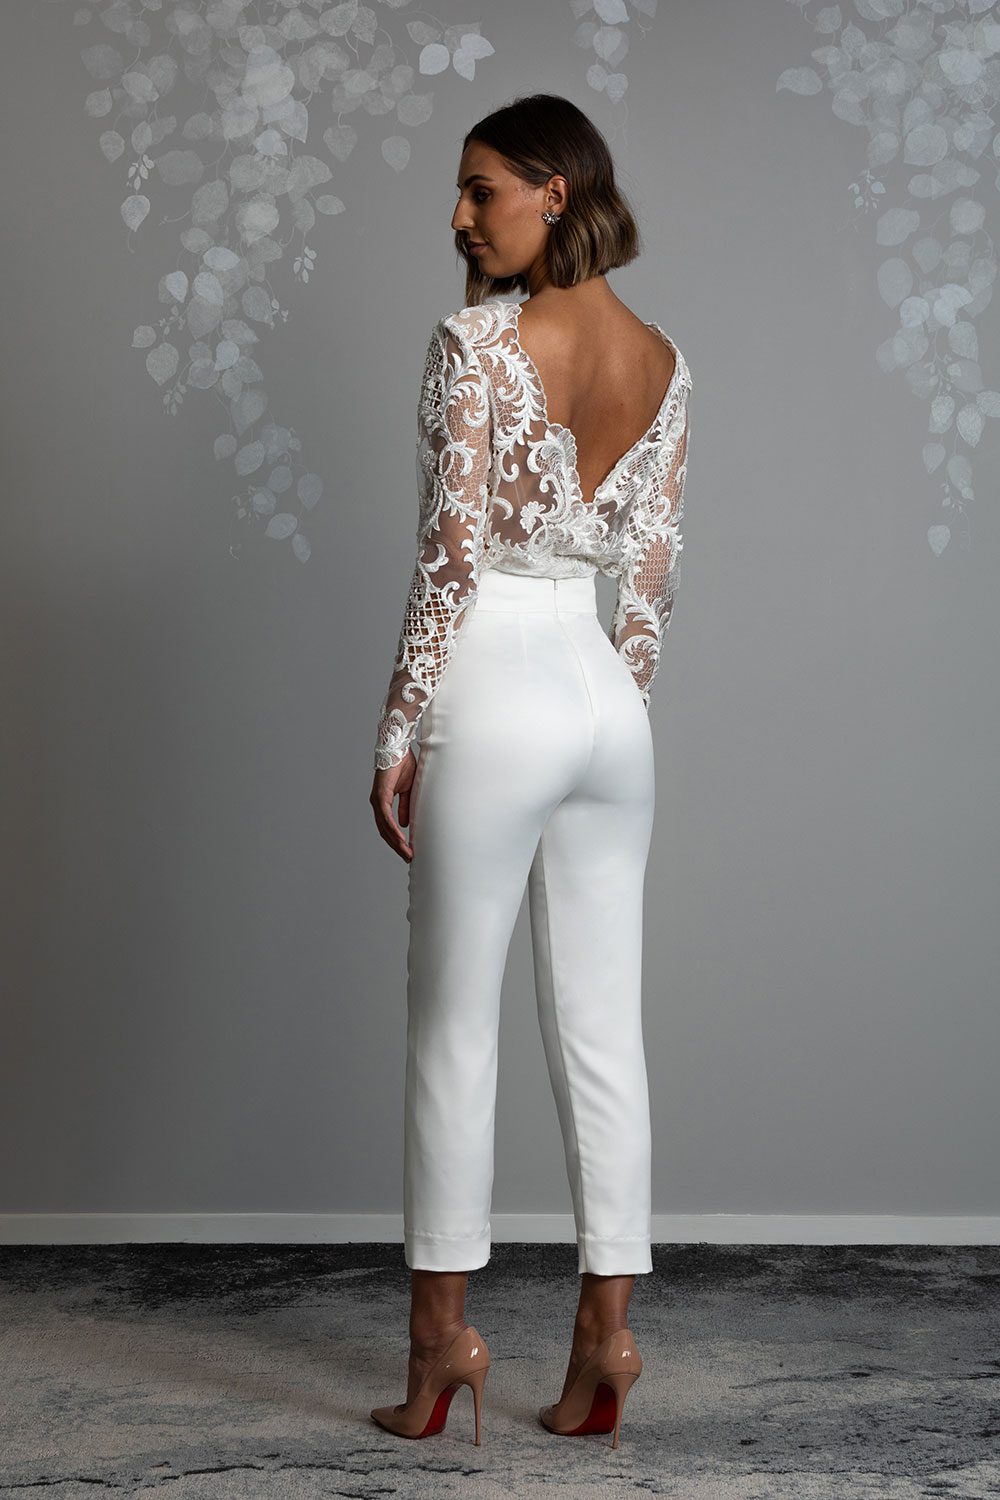 Ava Wedding Trousers and Blouse from Vinka Design - Elegantly tailored trouser combined with a beautiful lace blouse for the Modern Bride. The blouse features a high neck and low back, with in-built camisole, fitted sleeves, & pearl buttons. Full back view showing scalloped lace blouse with v cut back and perfectly fitted trousers